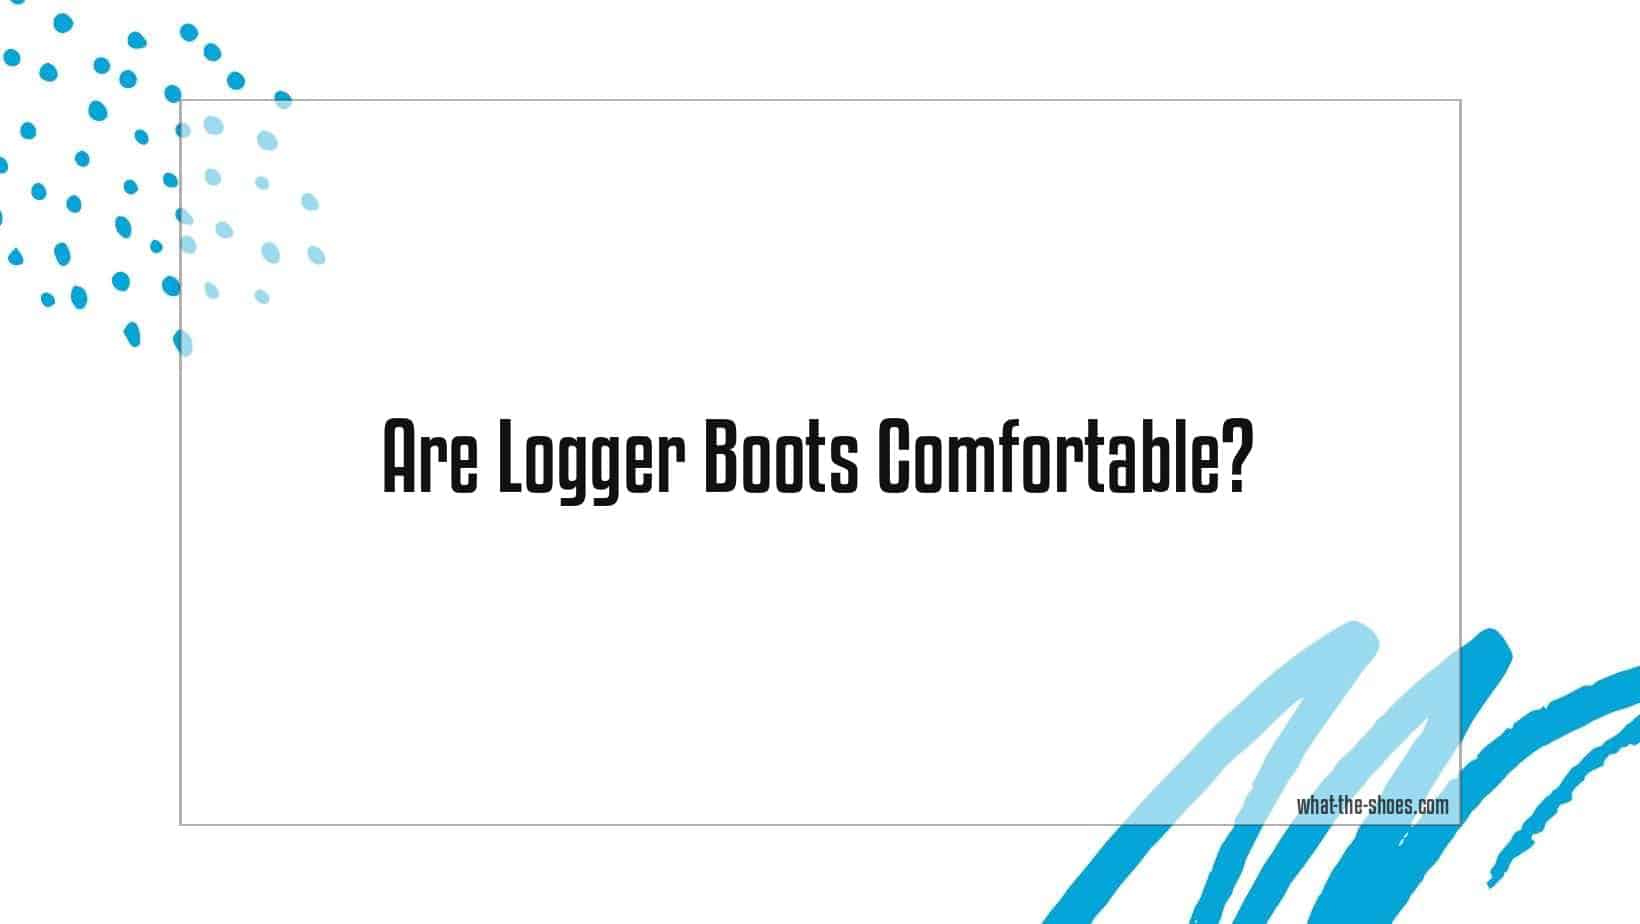 Are Logger Boots Comfortable? Expert Opinion